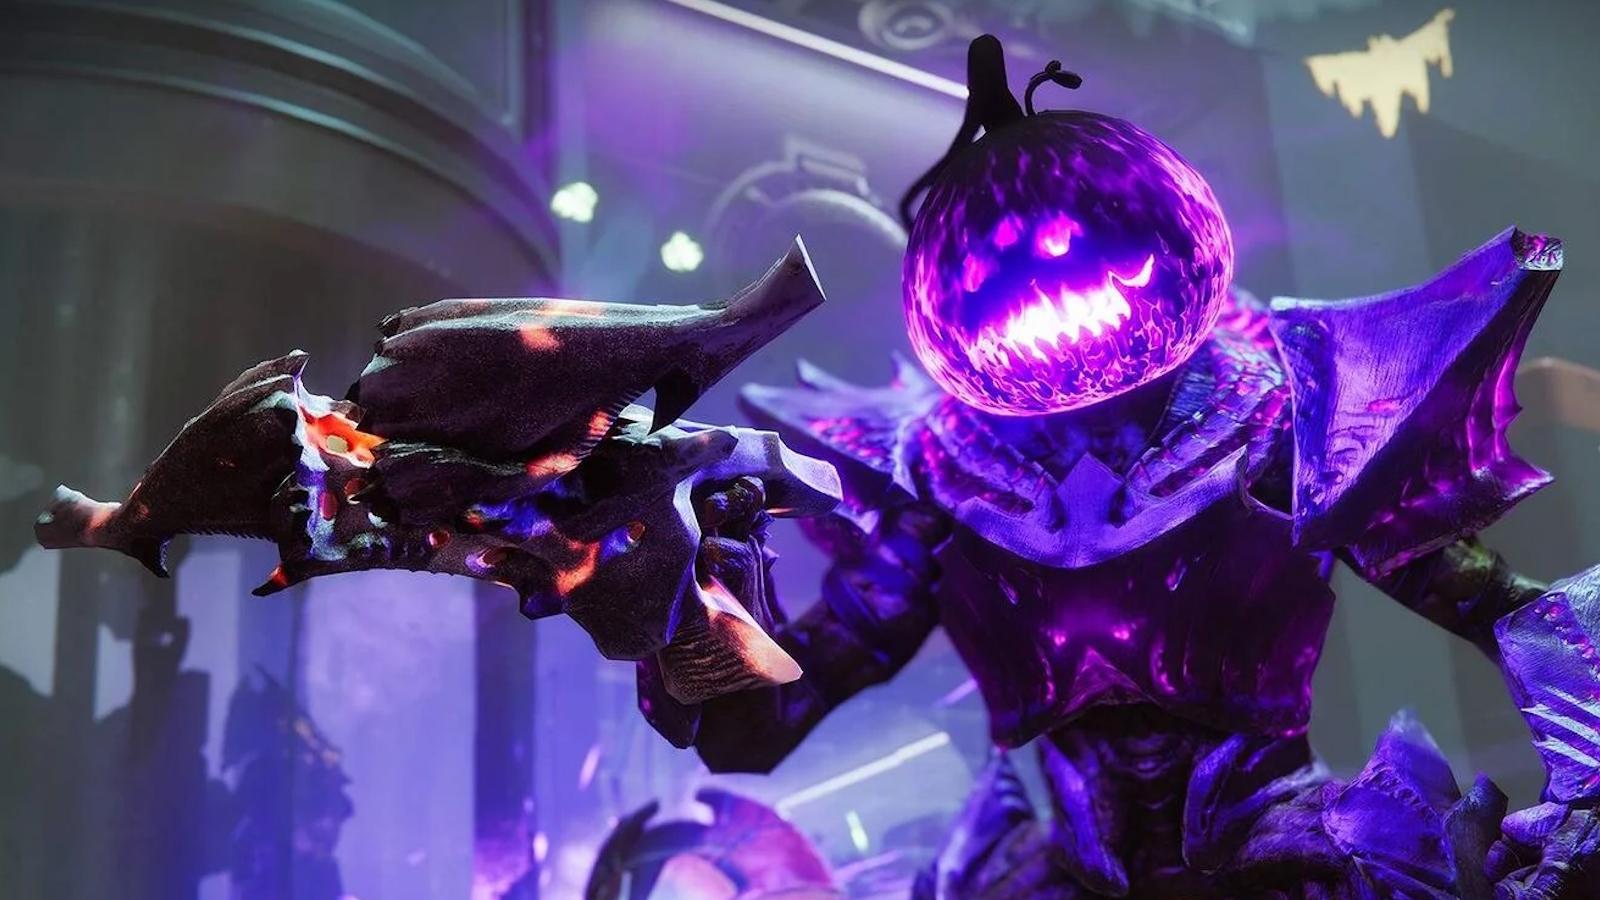 Unique Headless One enemy found in Destiny 2's Festival of the Lost holiday activities.